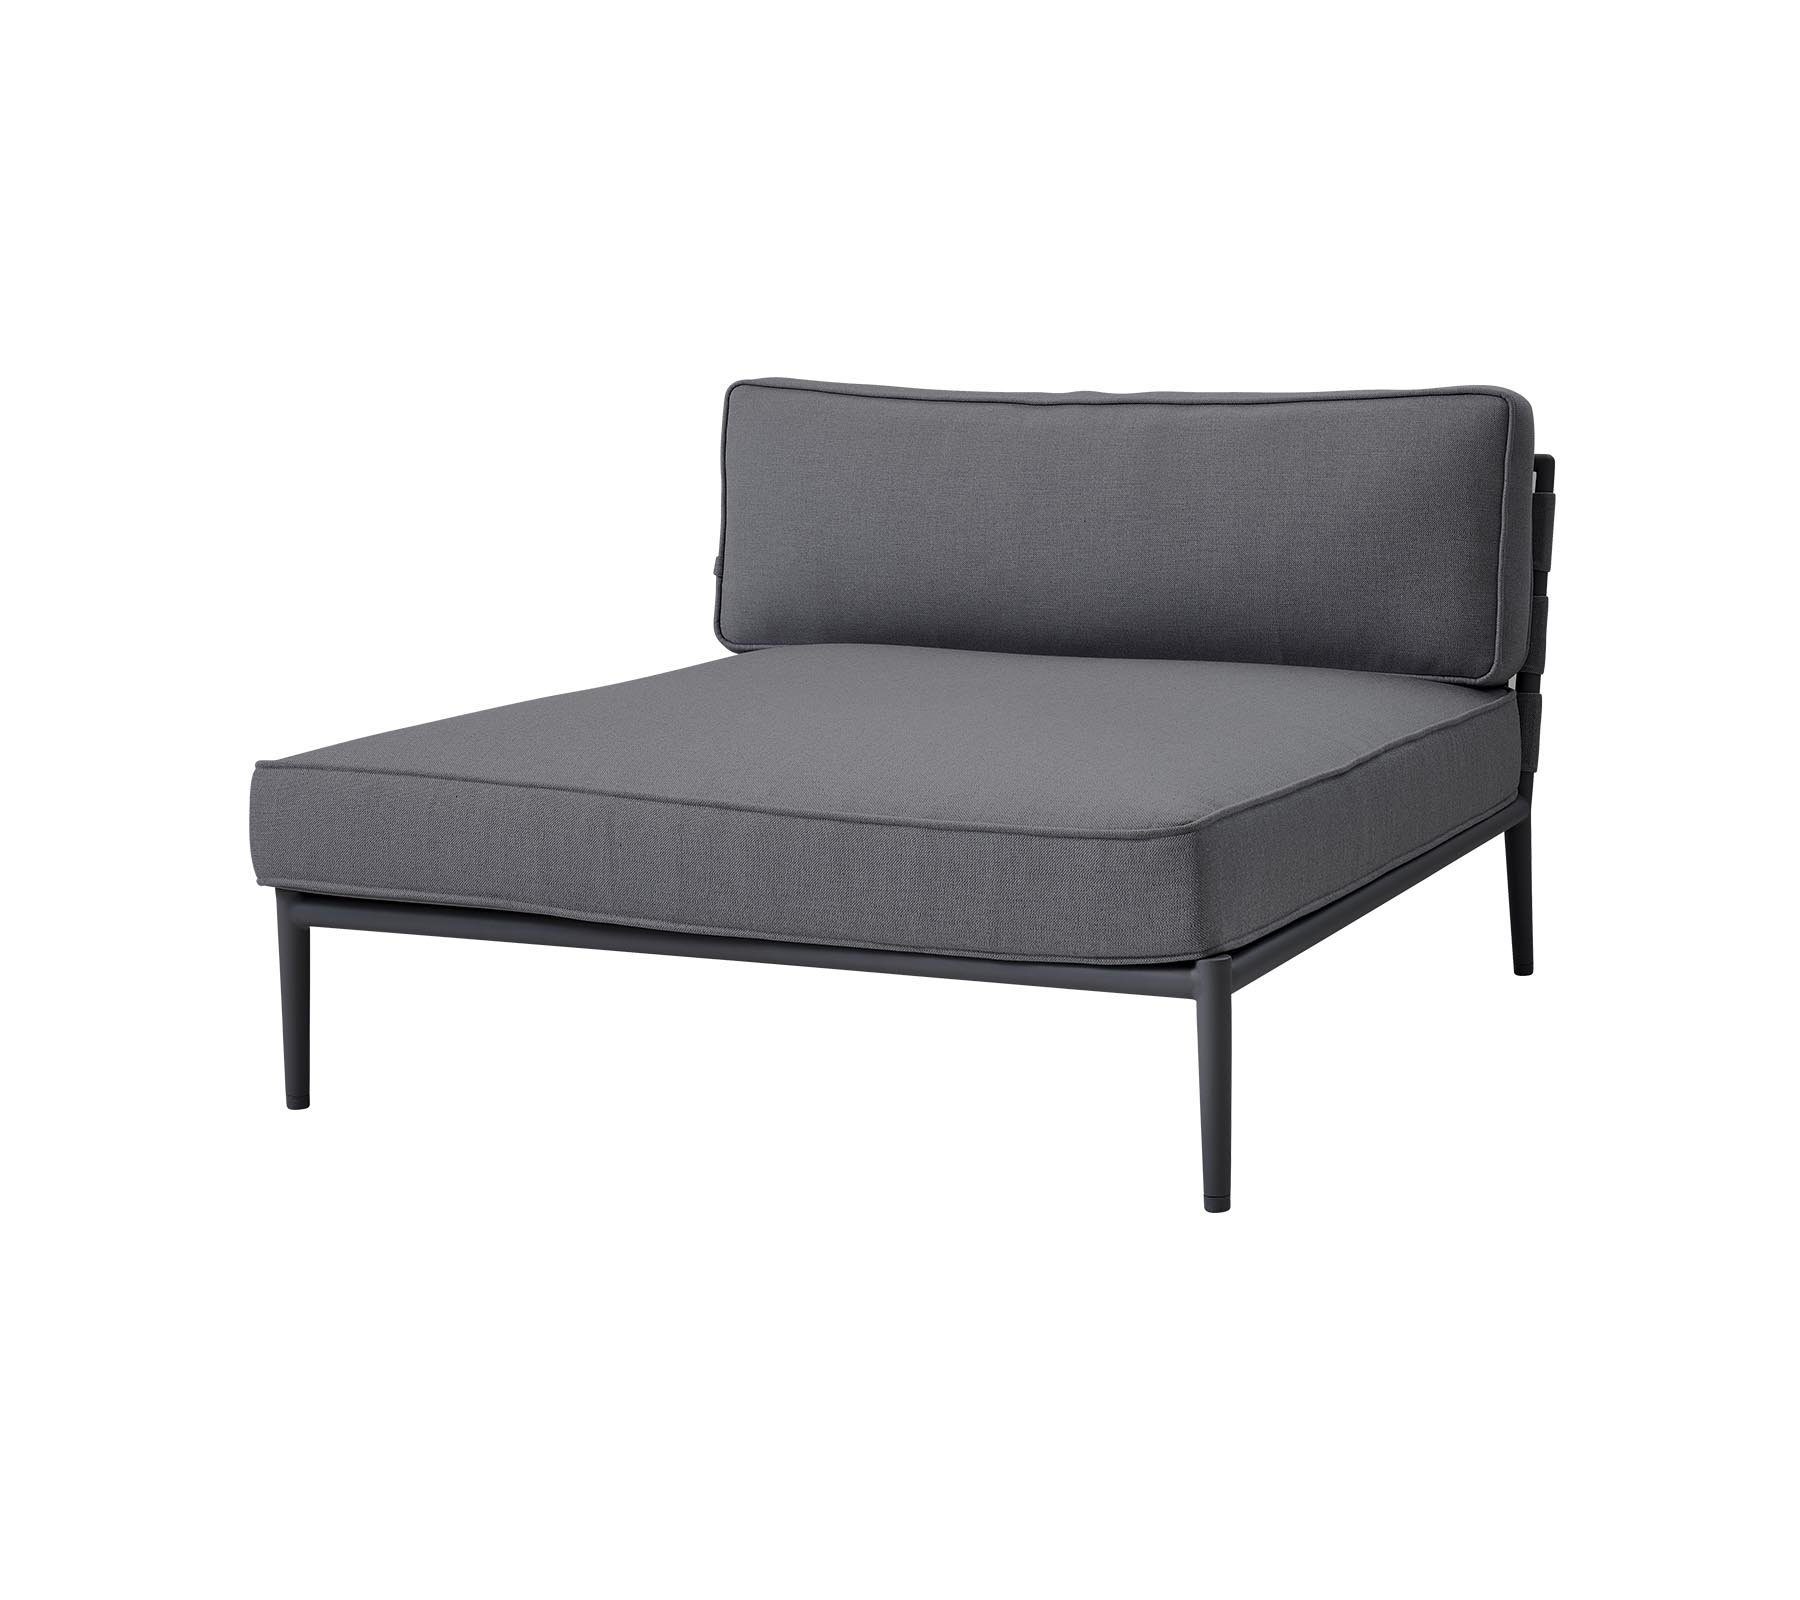 Cane - Line Daybed CANE-LINE Conic Daybed Modul Grey, Cane-line AirTouch Rahmen